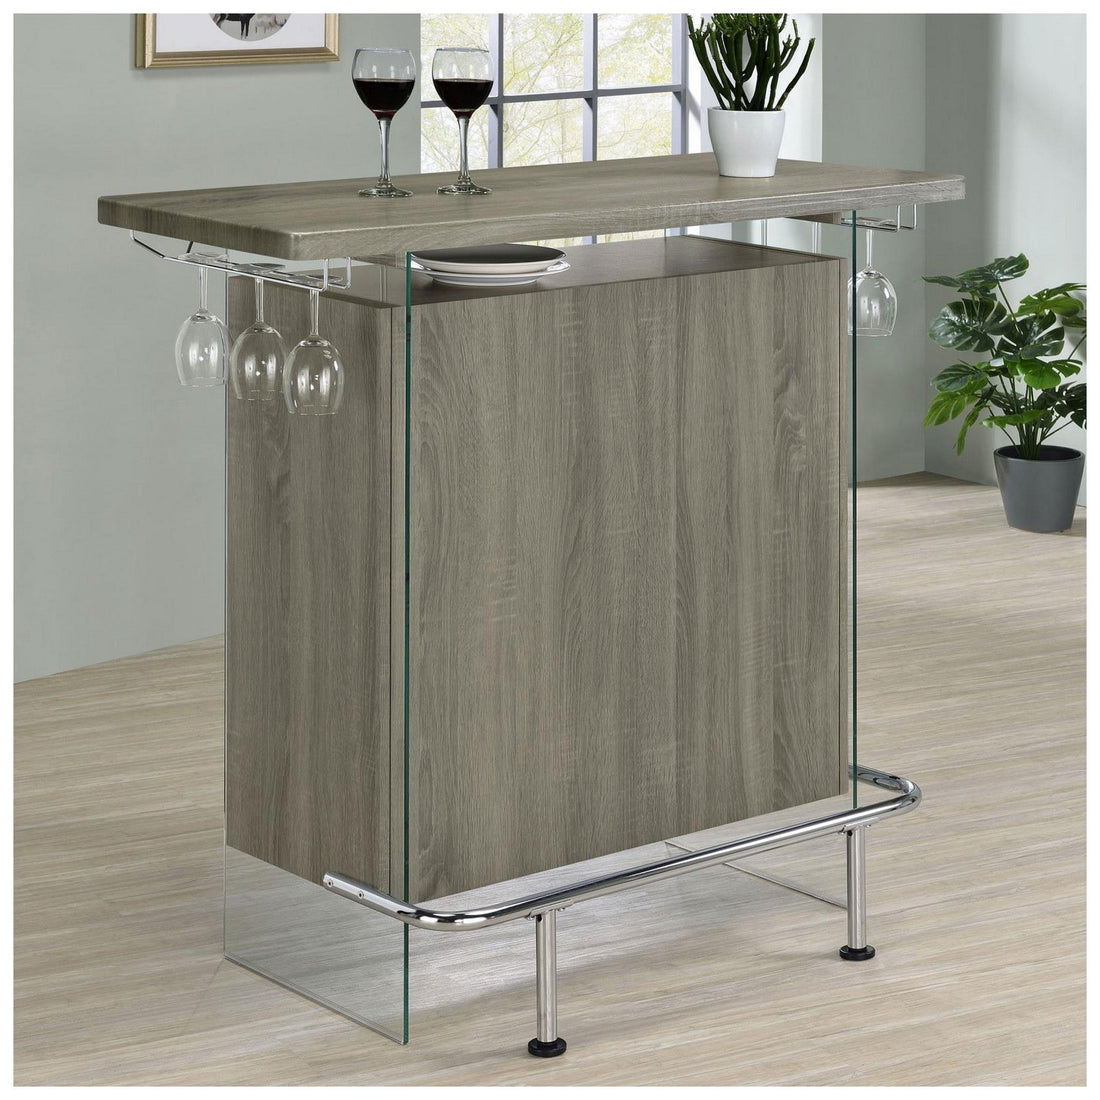 Acosta Rectangular Bar Unit with Footrest and Glass Side Panels 182631